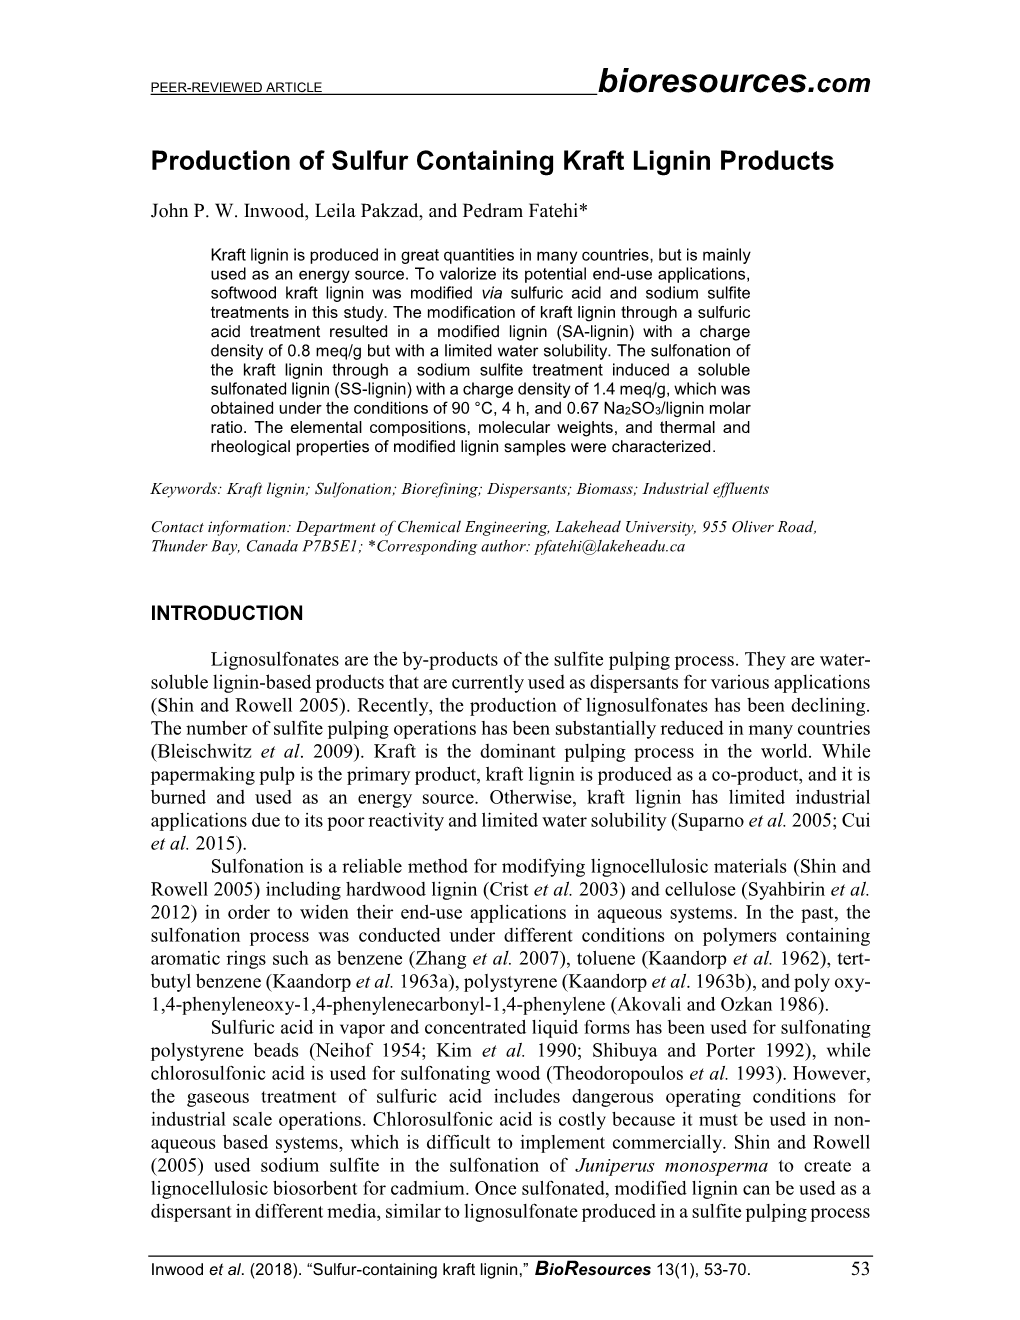 Production of Sulfur Containing Kraft Lignin Products